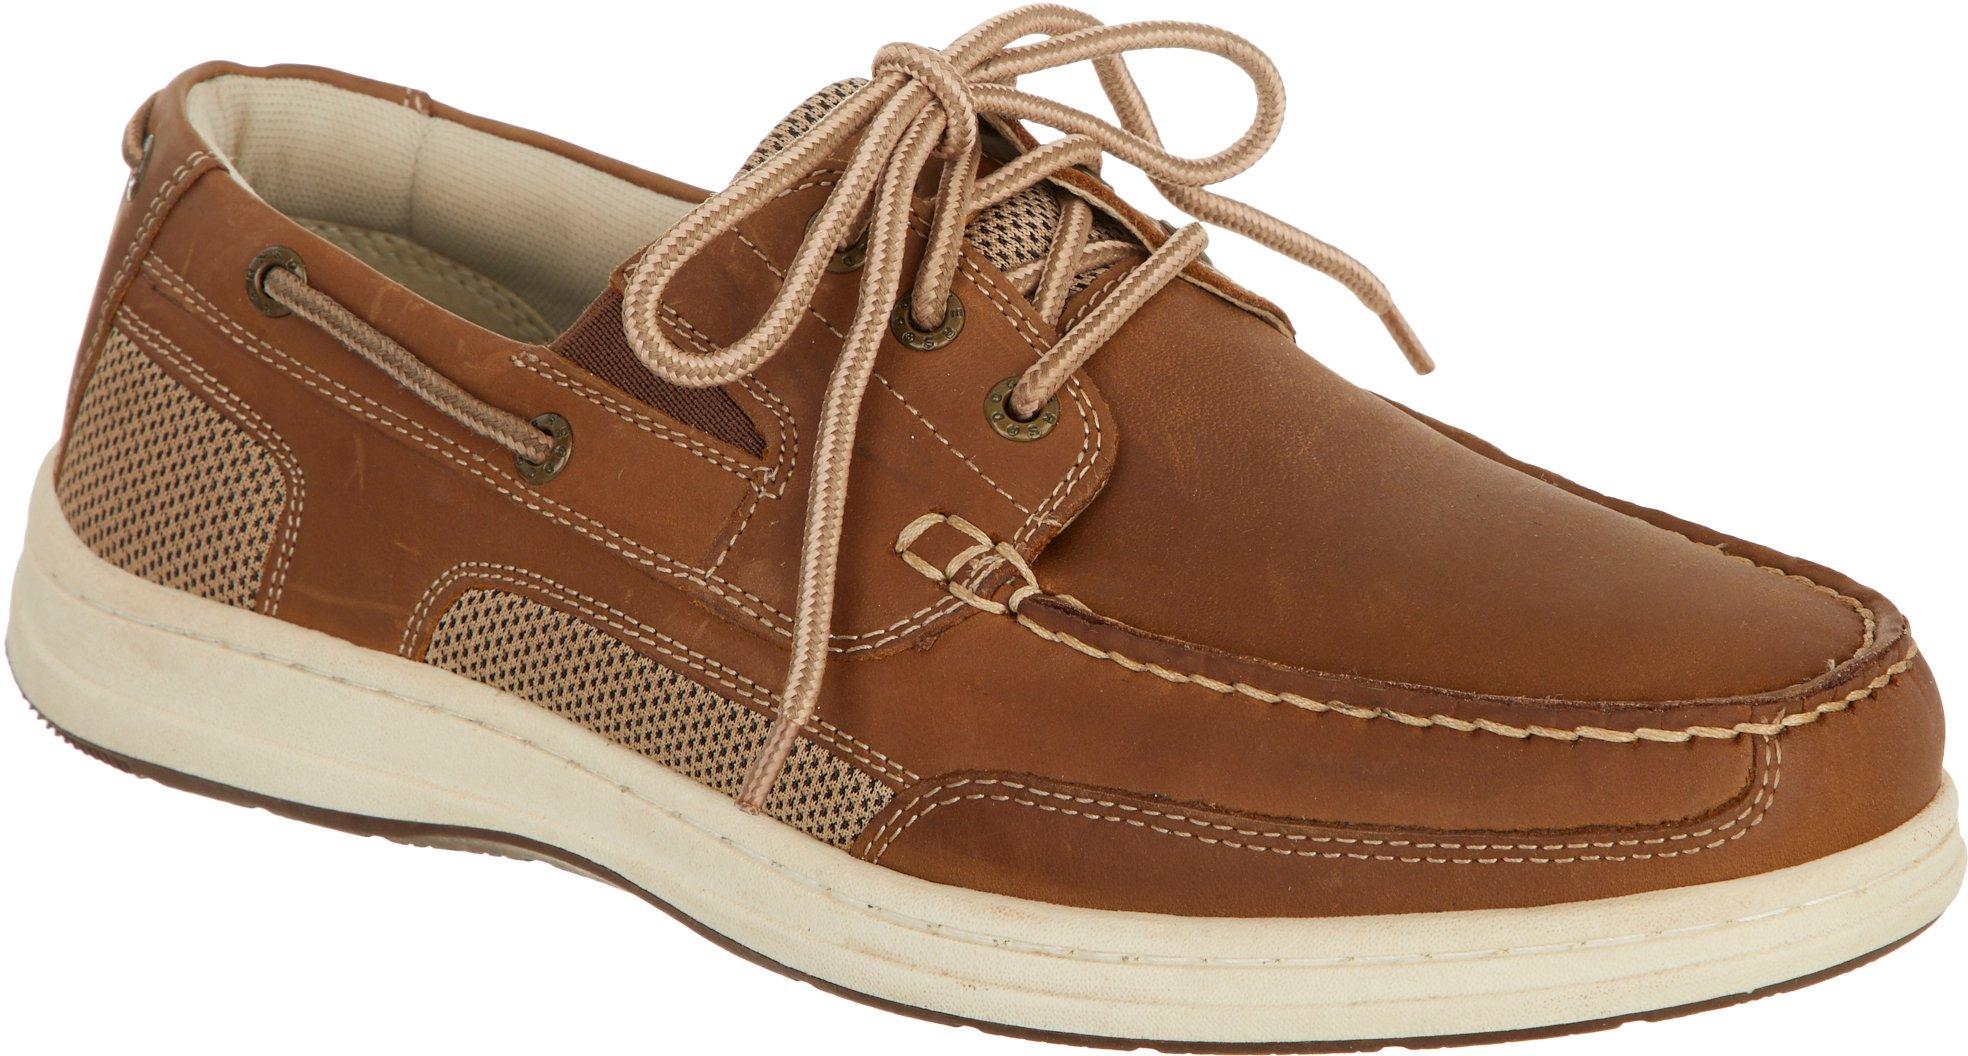 Reel Legends Mens Outrigger Casual Boat Shoes